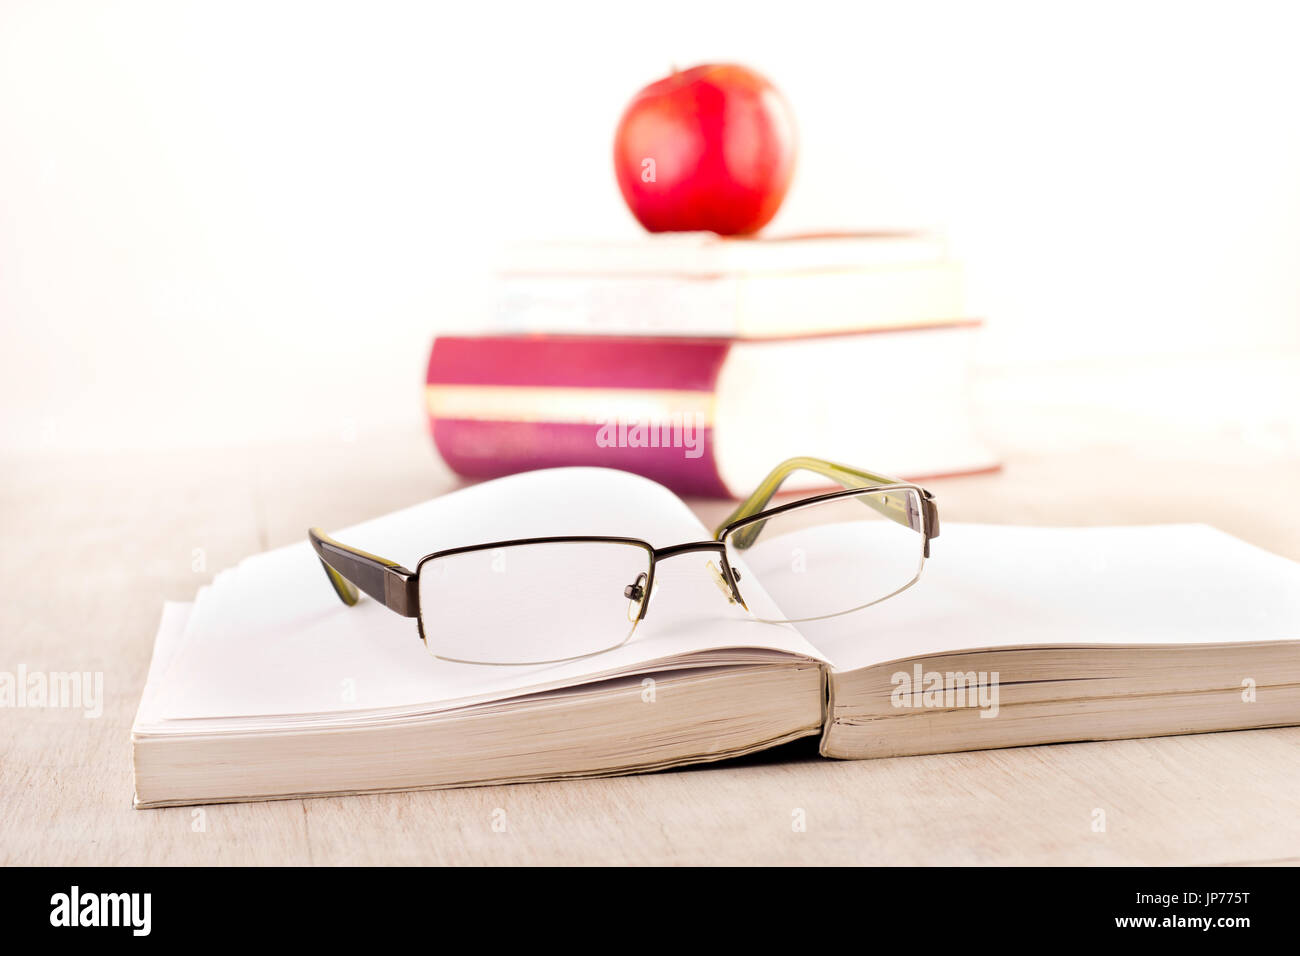 Close up of reading glasses on open book on desk with pile of literatures and apple in background Stock Photo